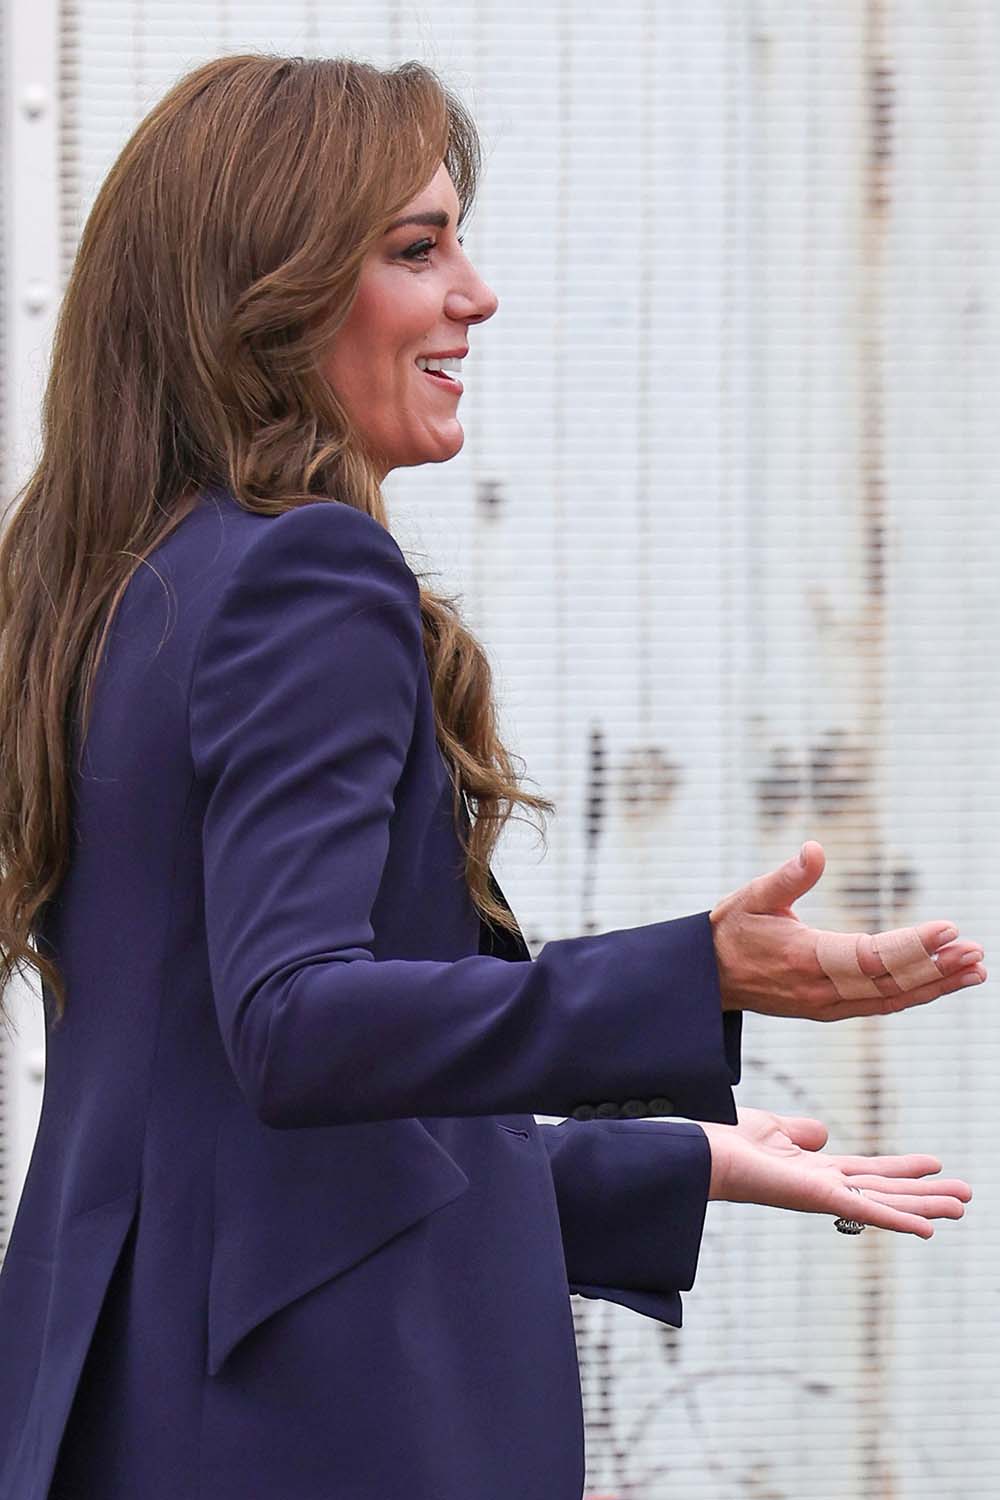 Kate Middleton - Foto: Getty Images